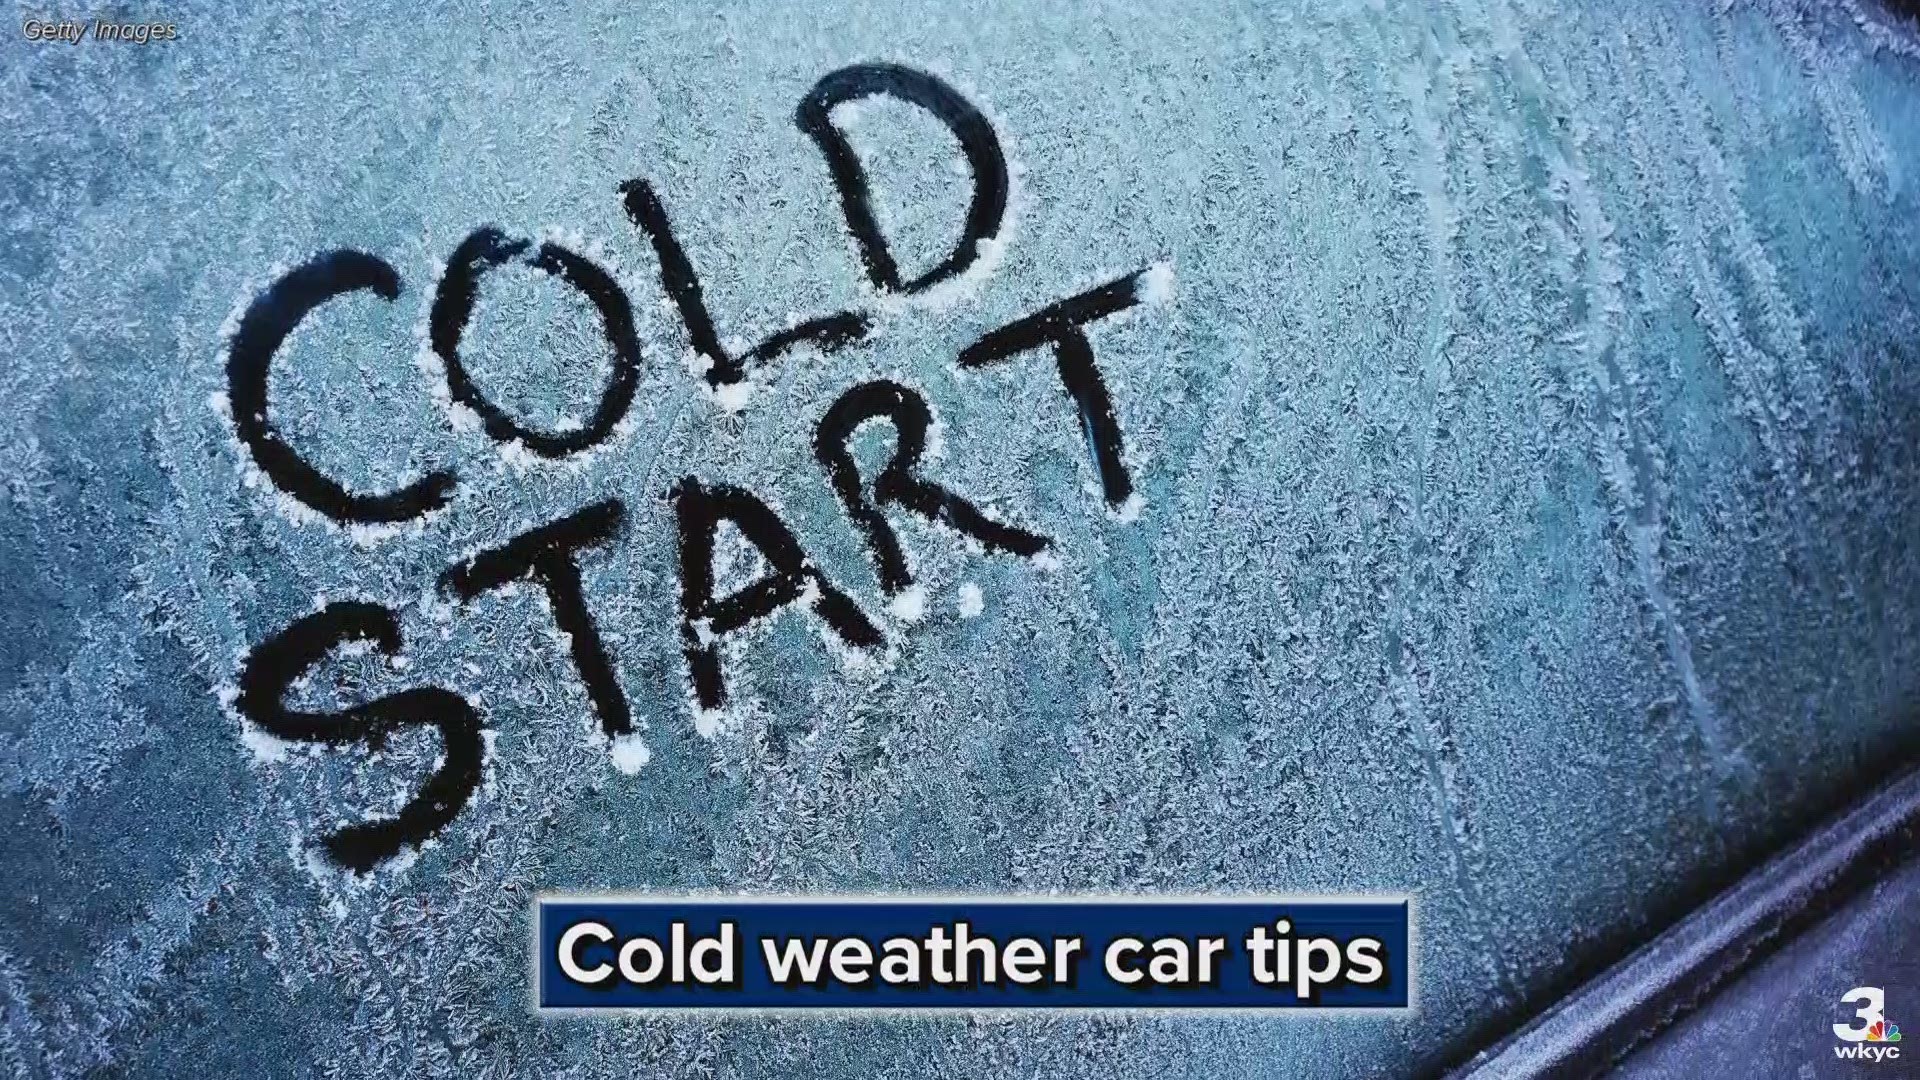 Tricks that will help get your vehicle through the cold